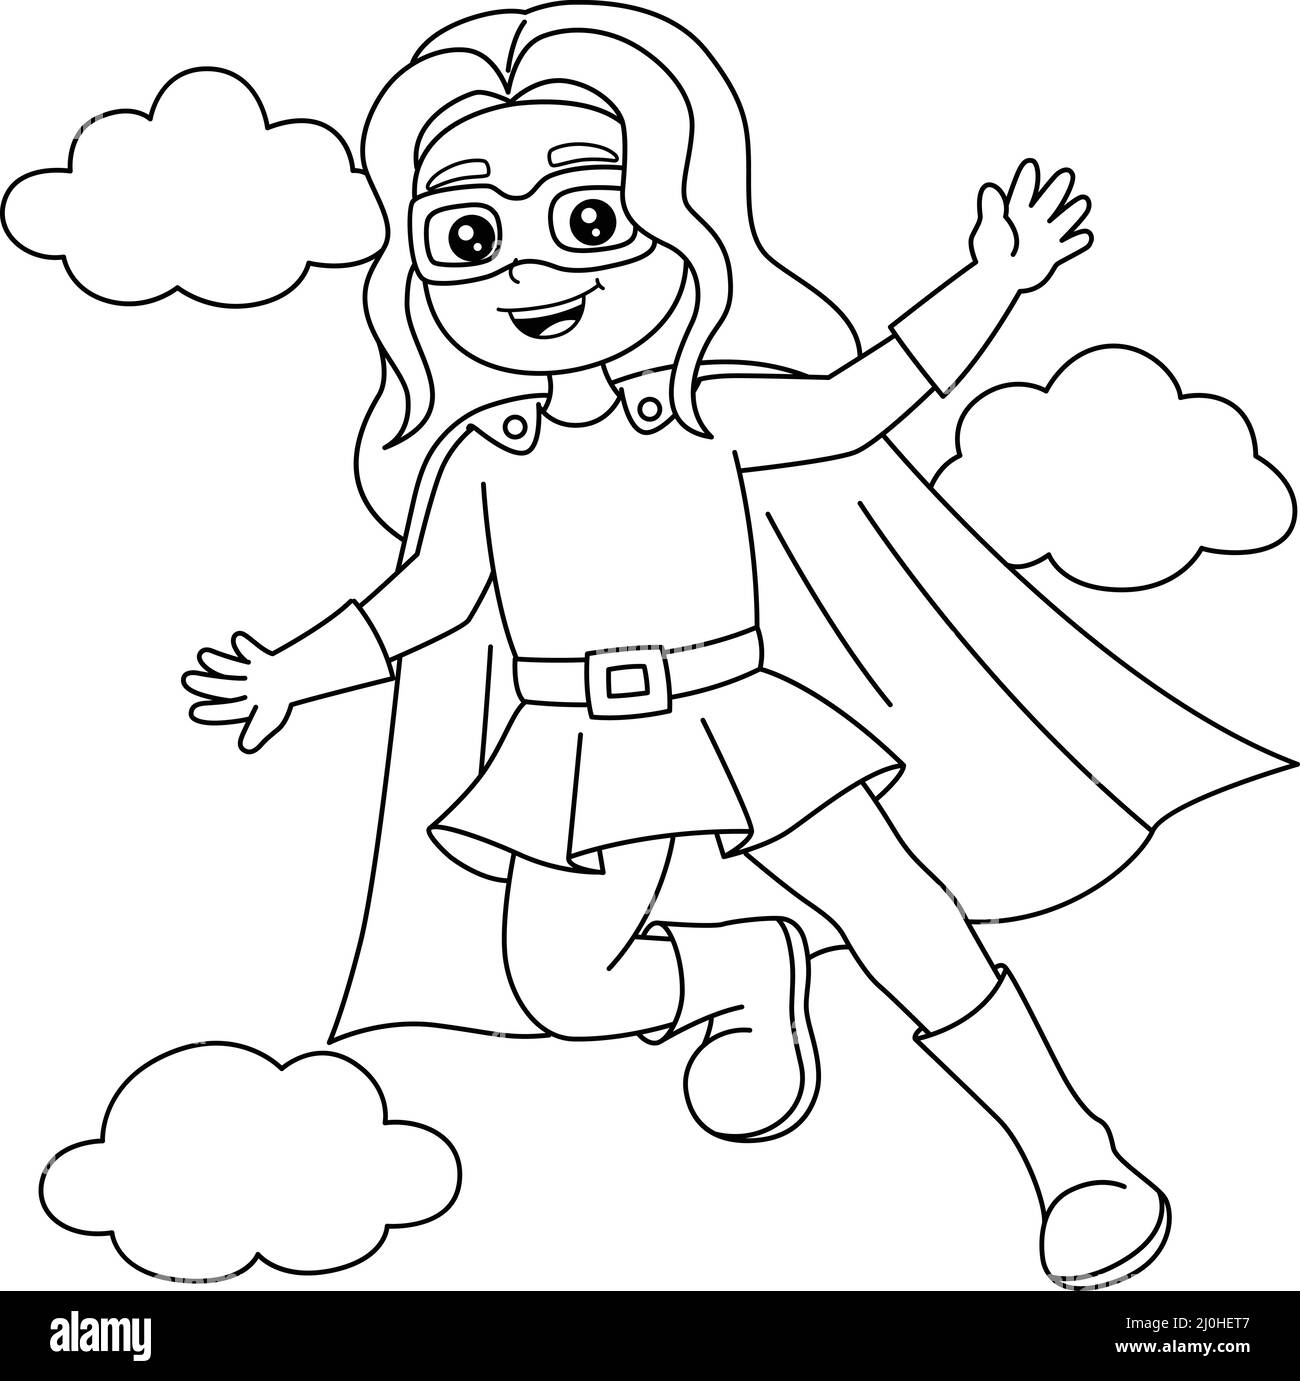 Superhero Girl Coloring Page for Kids Stock Vector